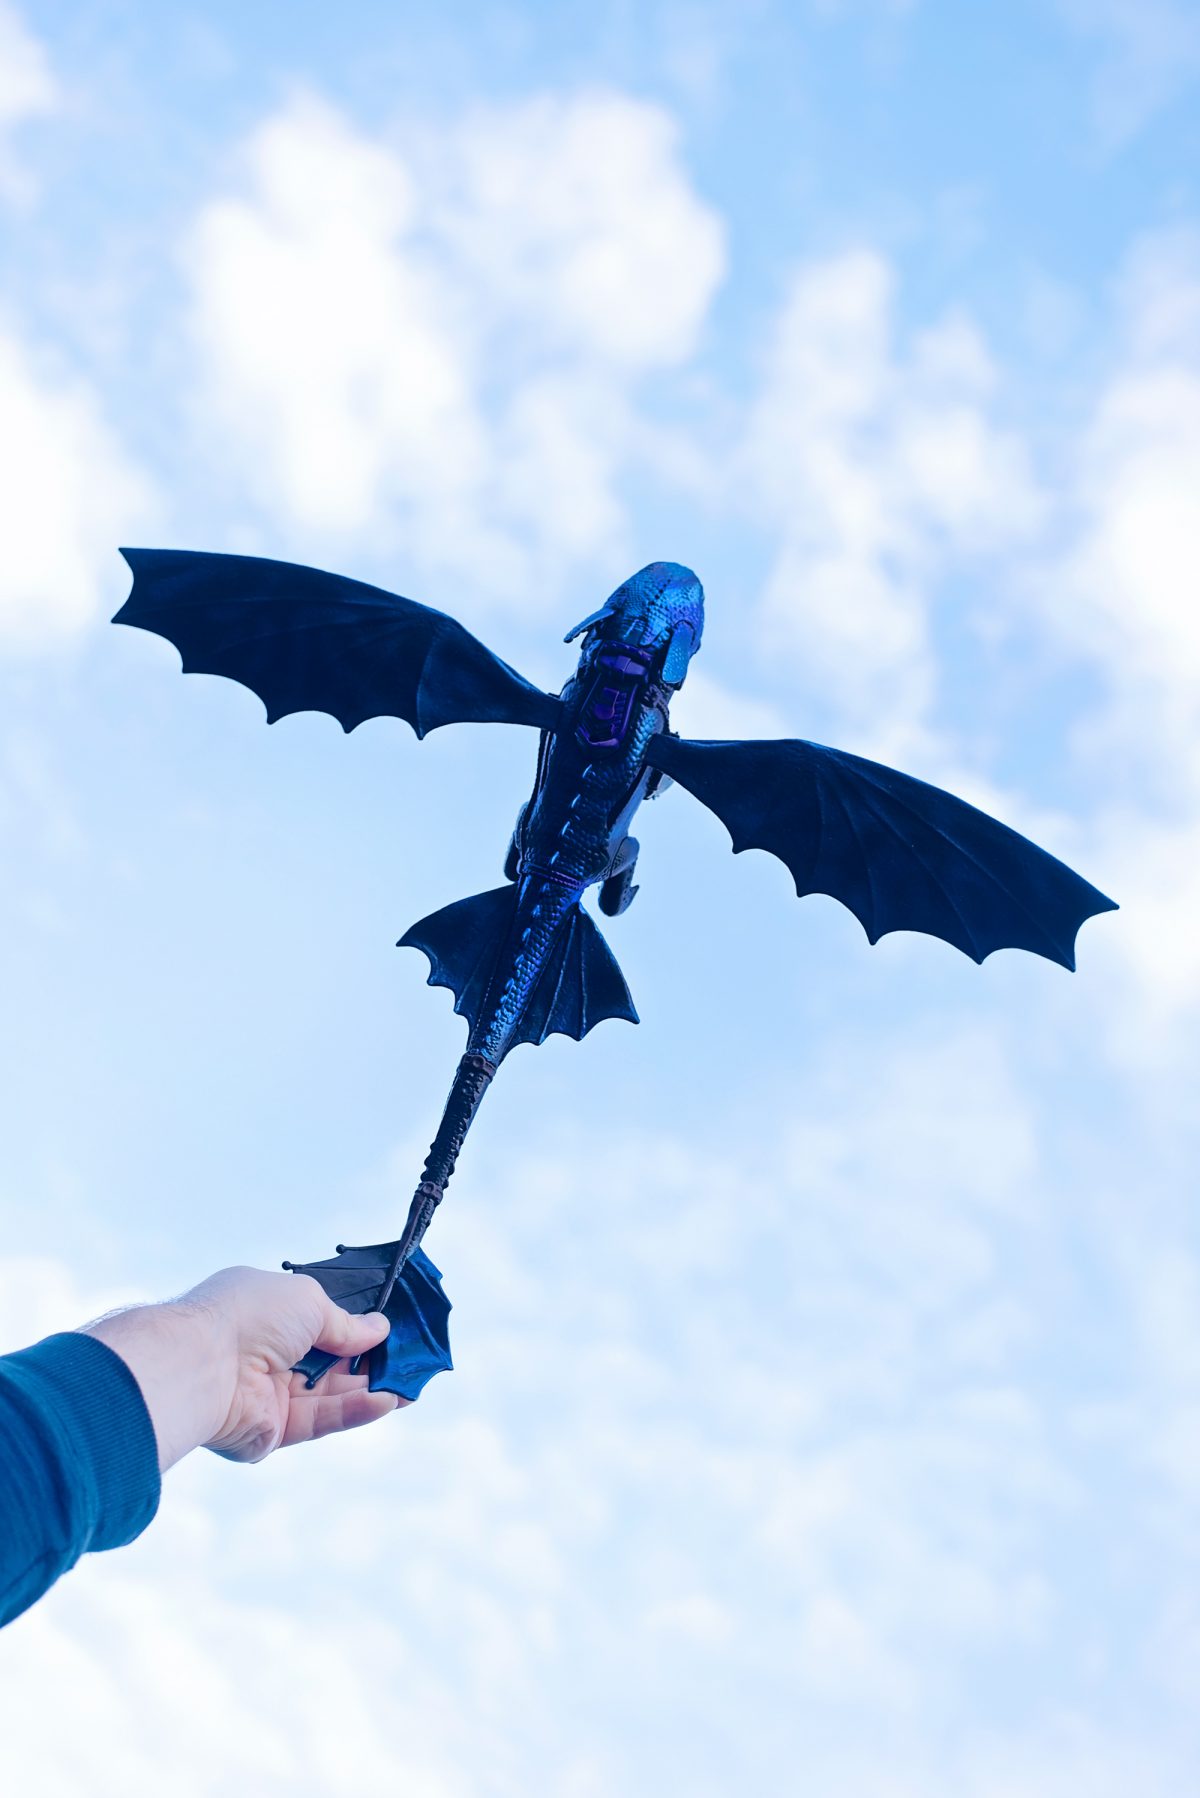 HTTYD3 Toys Toothless Fire Breathing Dragon How to train your dragon 3 dreamworks